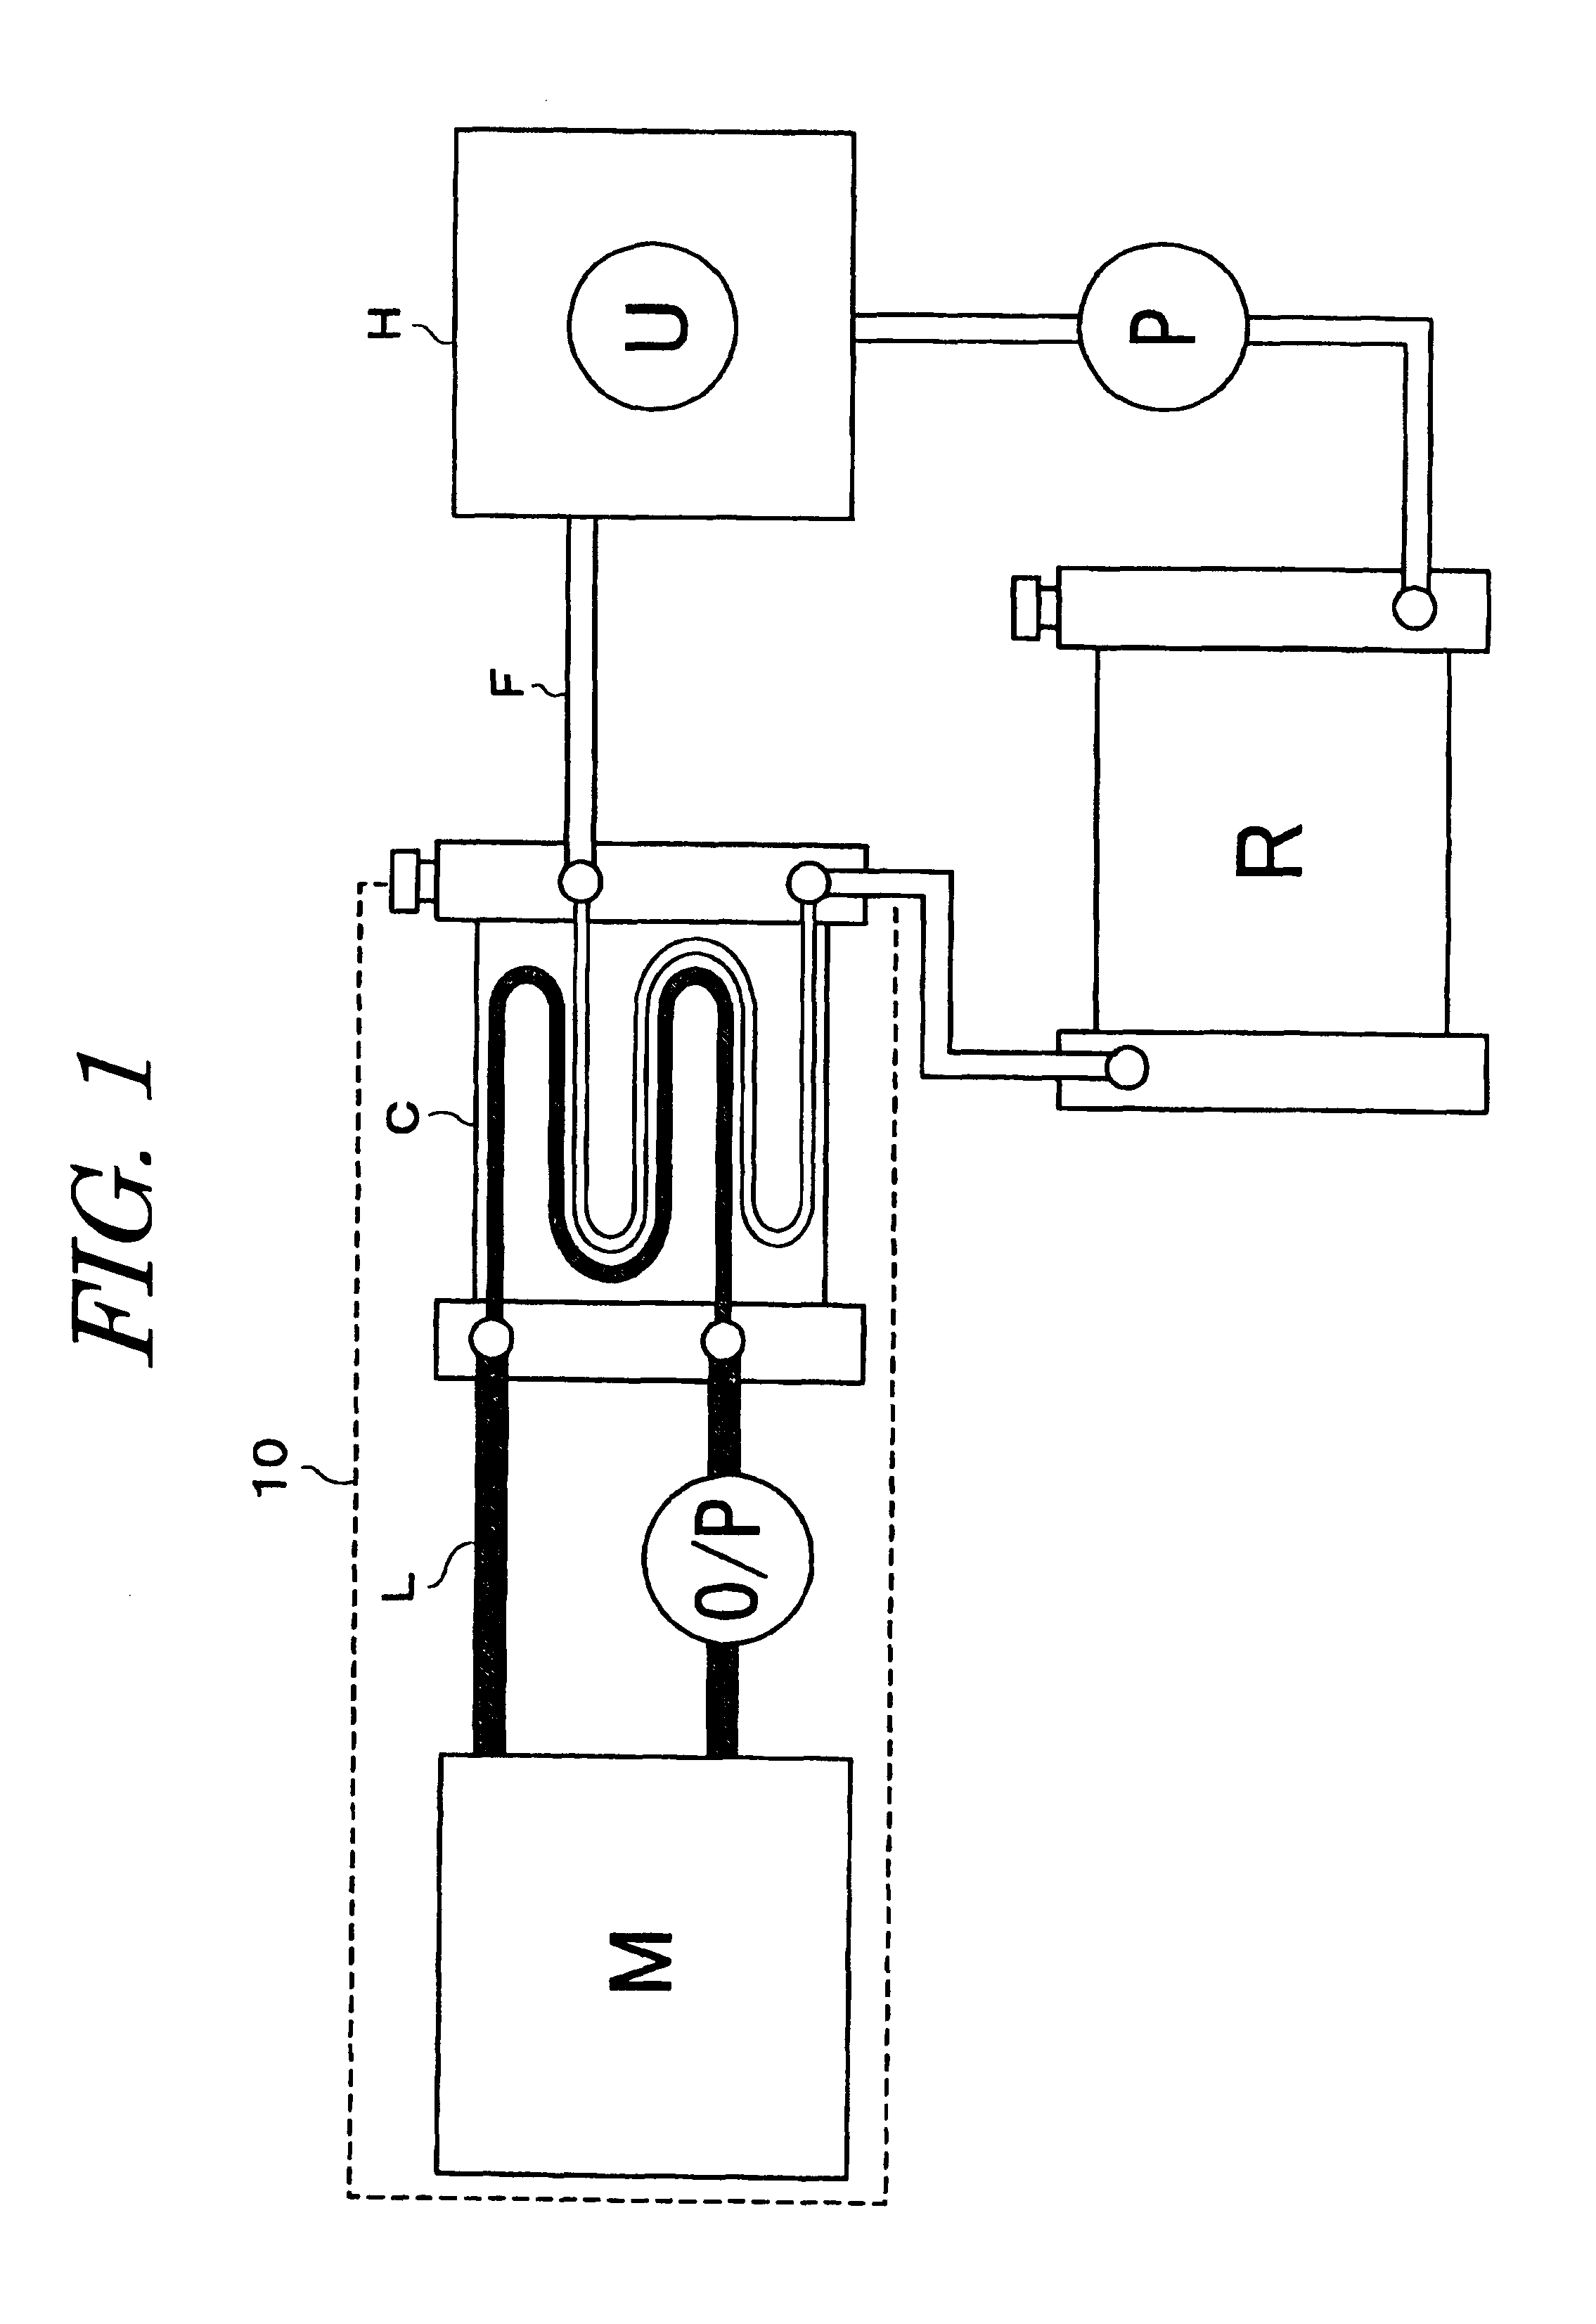 Drive unit with two coolant circuits for electric motor